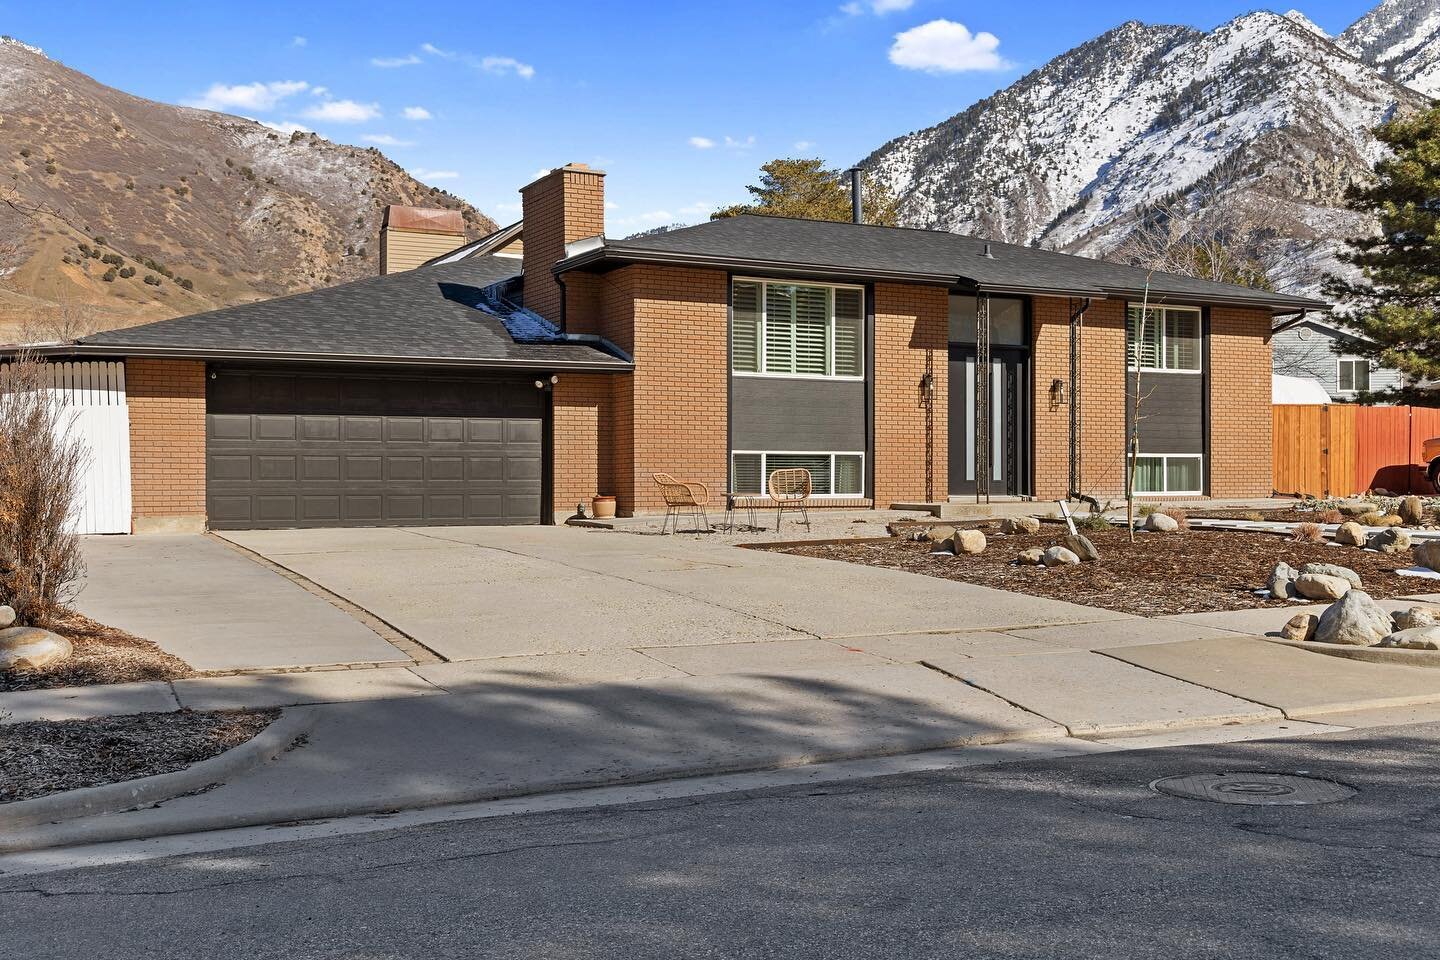 I think my favorite thing is seeing an older home completely updated😍 What about you?

Listed by: Colleen Lyons
Brokered by: @cbrealtyutah 

&bull;
&bull;
&bull;
&bull;
&bull;

#utahrealestate #utahrealtor #utahhomes #southernutahrealestate #souther